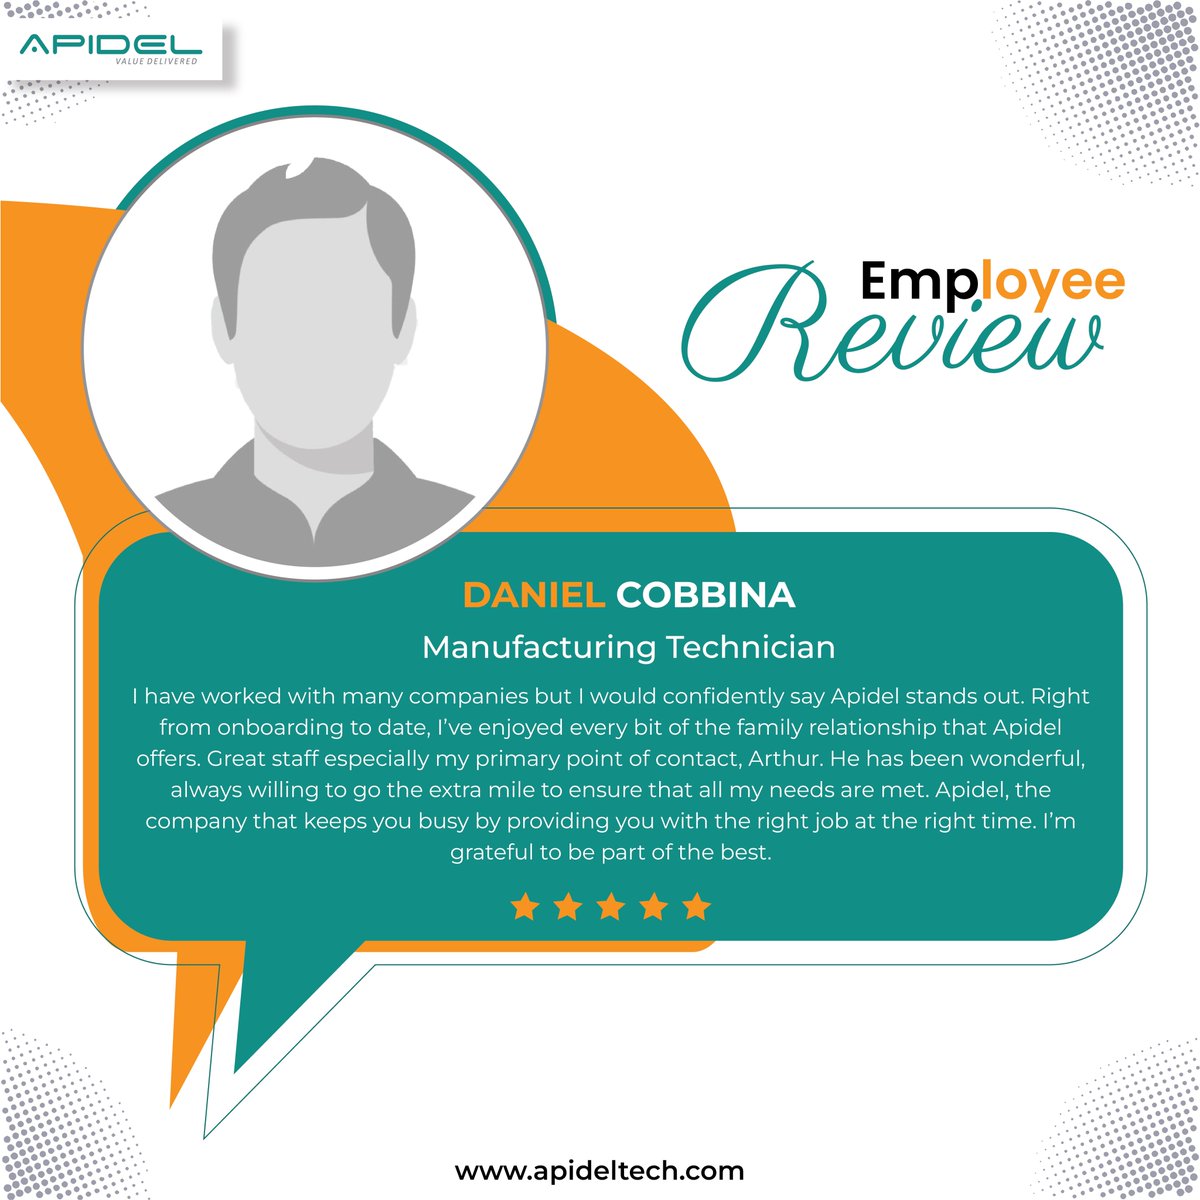 Daniel Cobbina’s Take on Apidel Technologies

👏 Big Props for Going Above and Beyond! 🌟 🌟👏

#apideltechnologies #candidatereview #companyreview